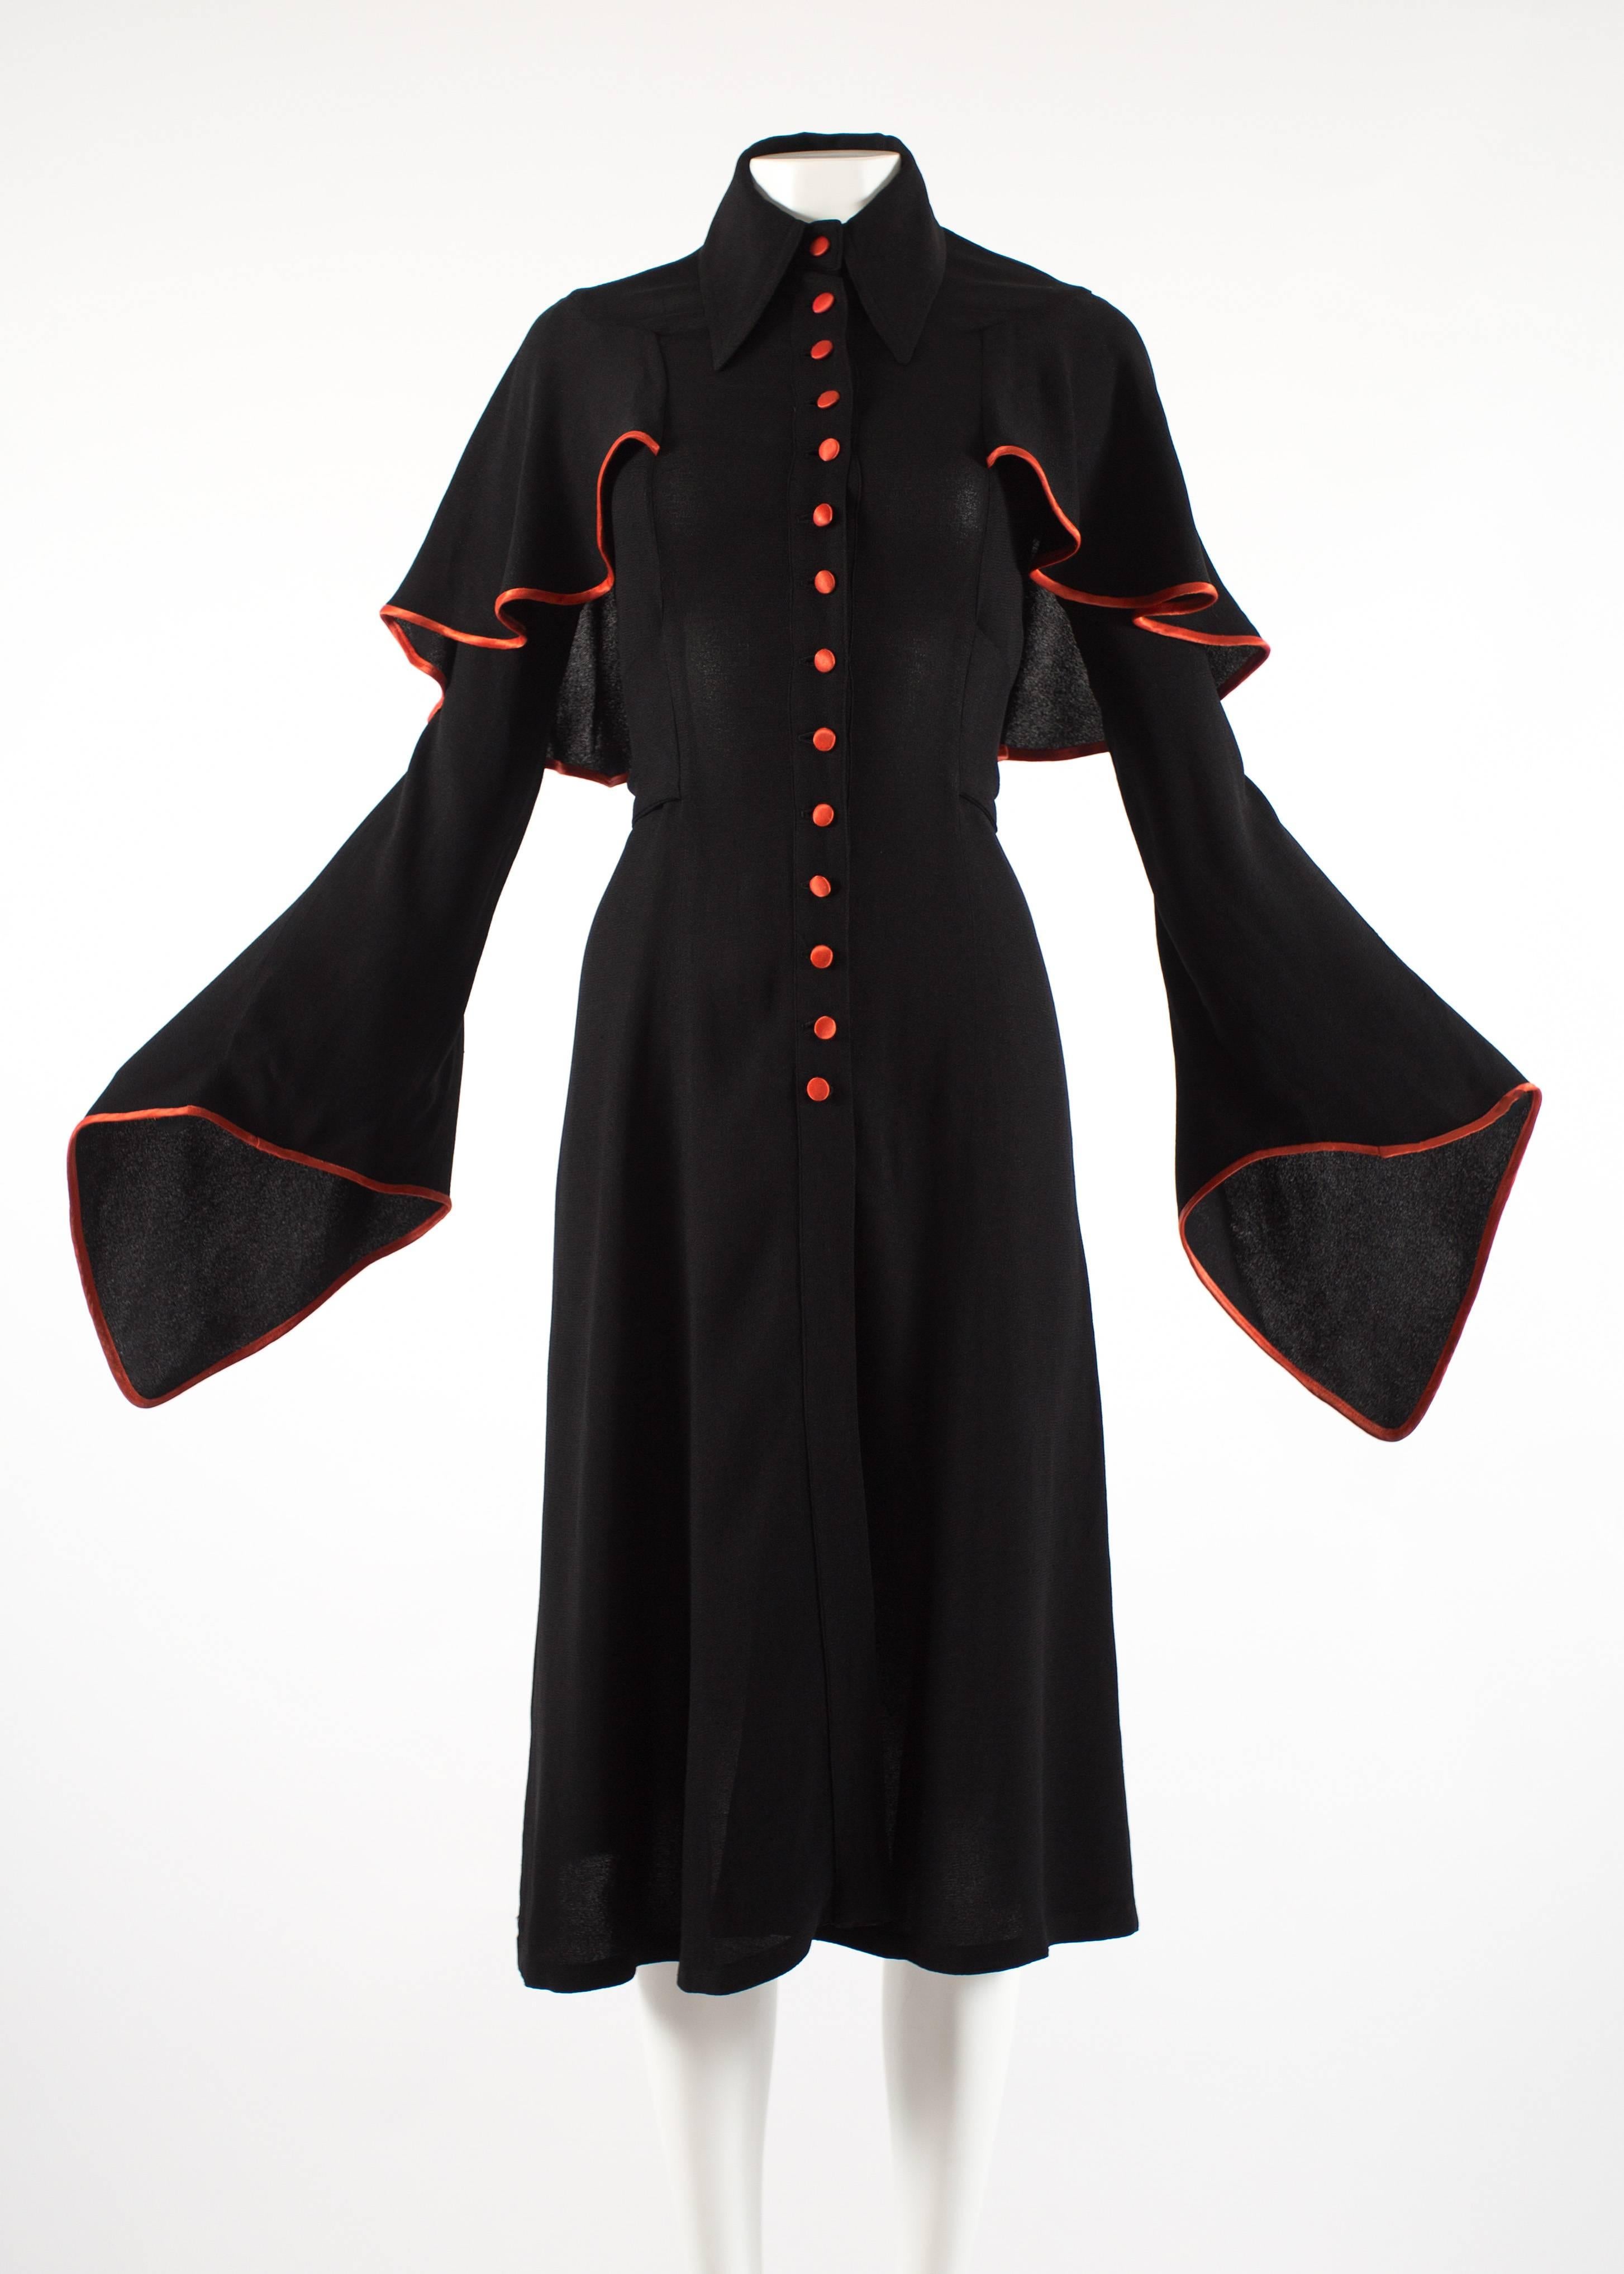 Ossie Clark 1970 black moss crepe mid length dress with red satin trim, button fastenings, pointed collar, attached waist belt and exaggerated bell sleeves.
